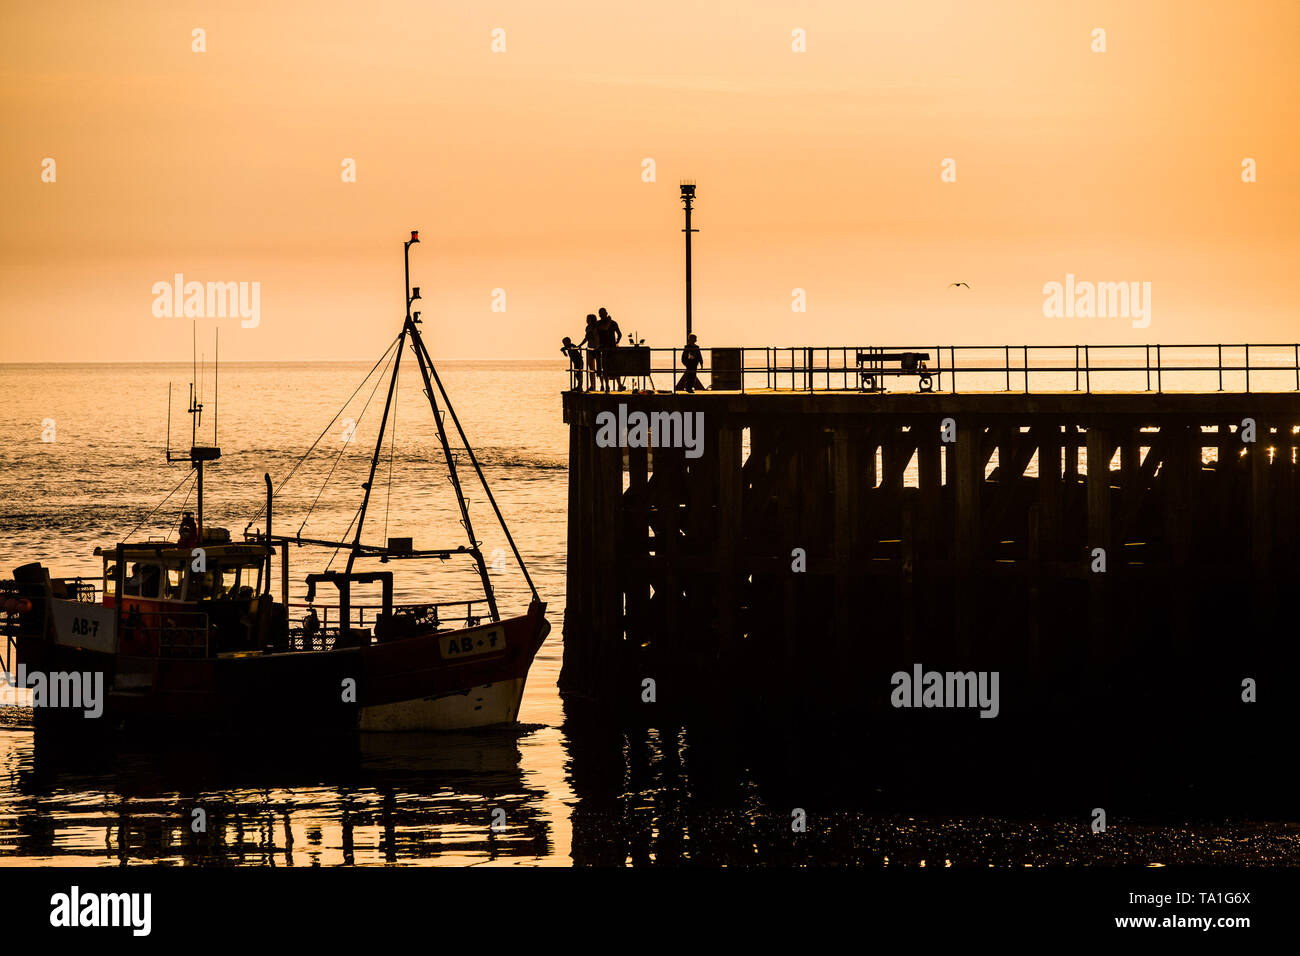 Aberystwyth Wales Uk. Tuesday 21 May 2019  UK weather: Inshore fishing boats are silhouetted as they return to Aberystwyth harbour with the high tide in the evening after a day out catching Cardigan Bay crab and lobster.   photo Credit: Keith Morris/Alamy Live News Stock Photo